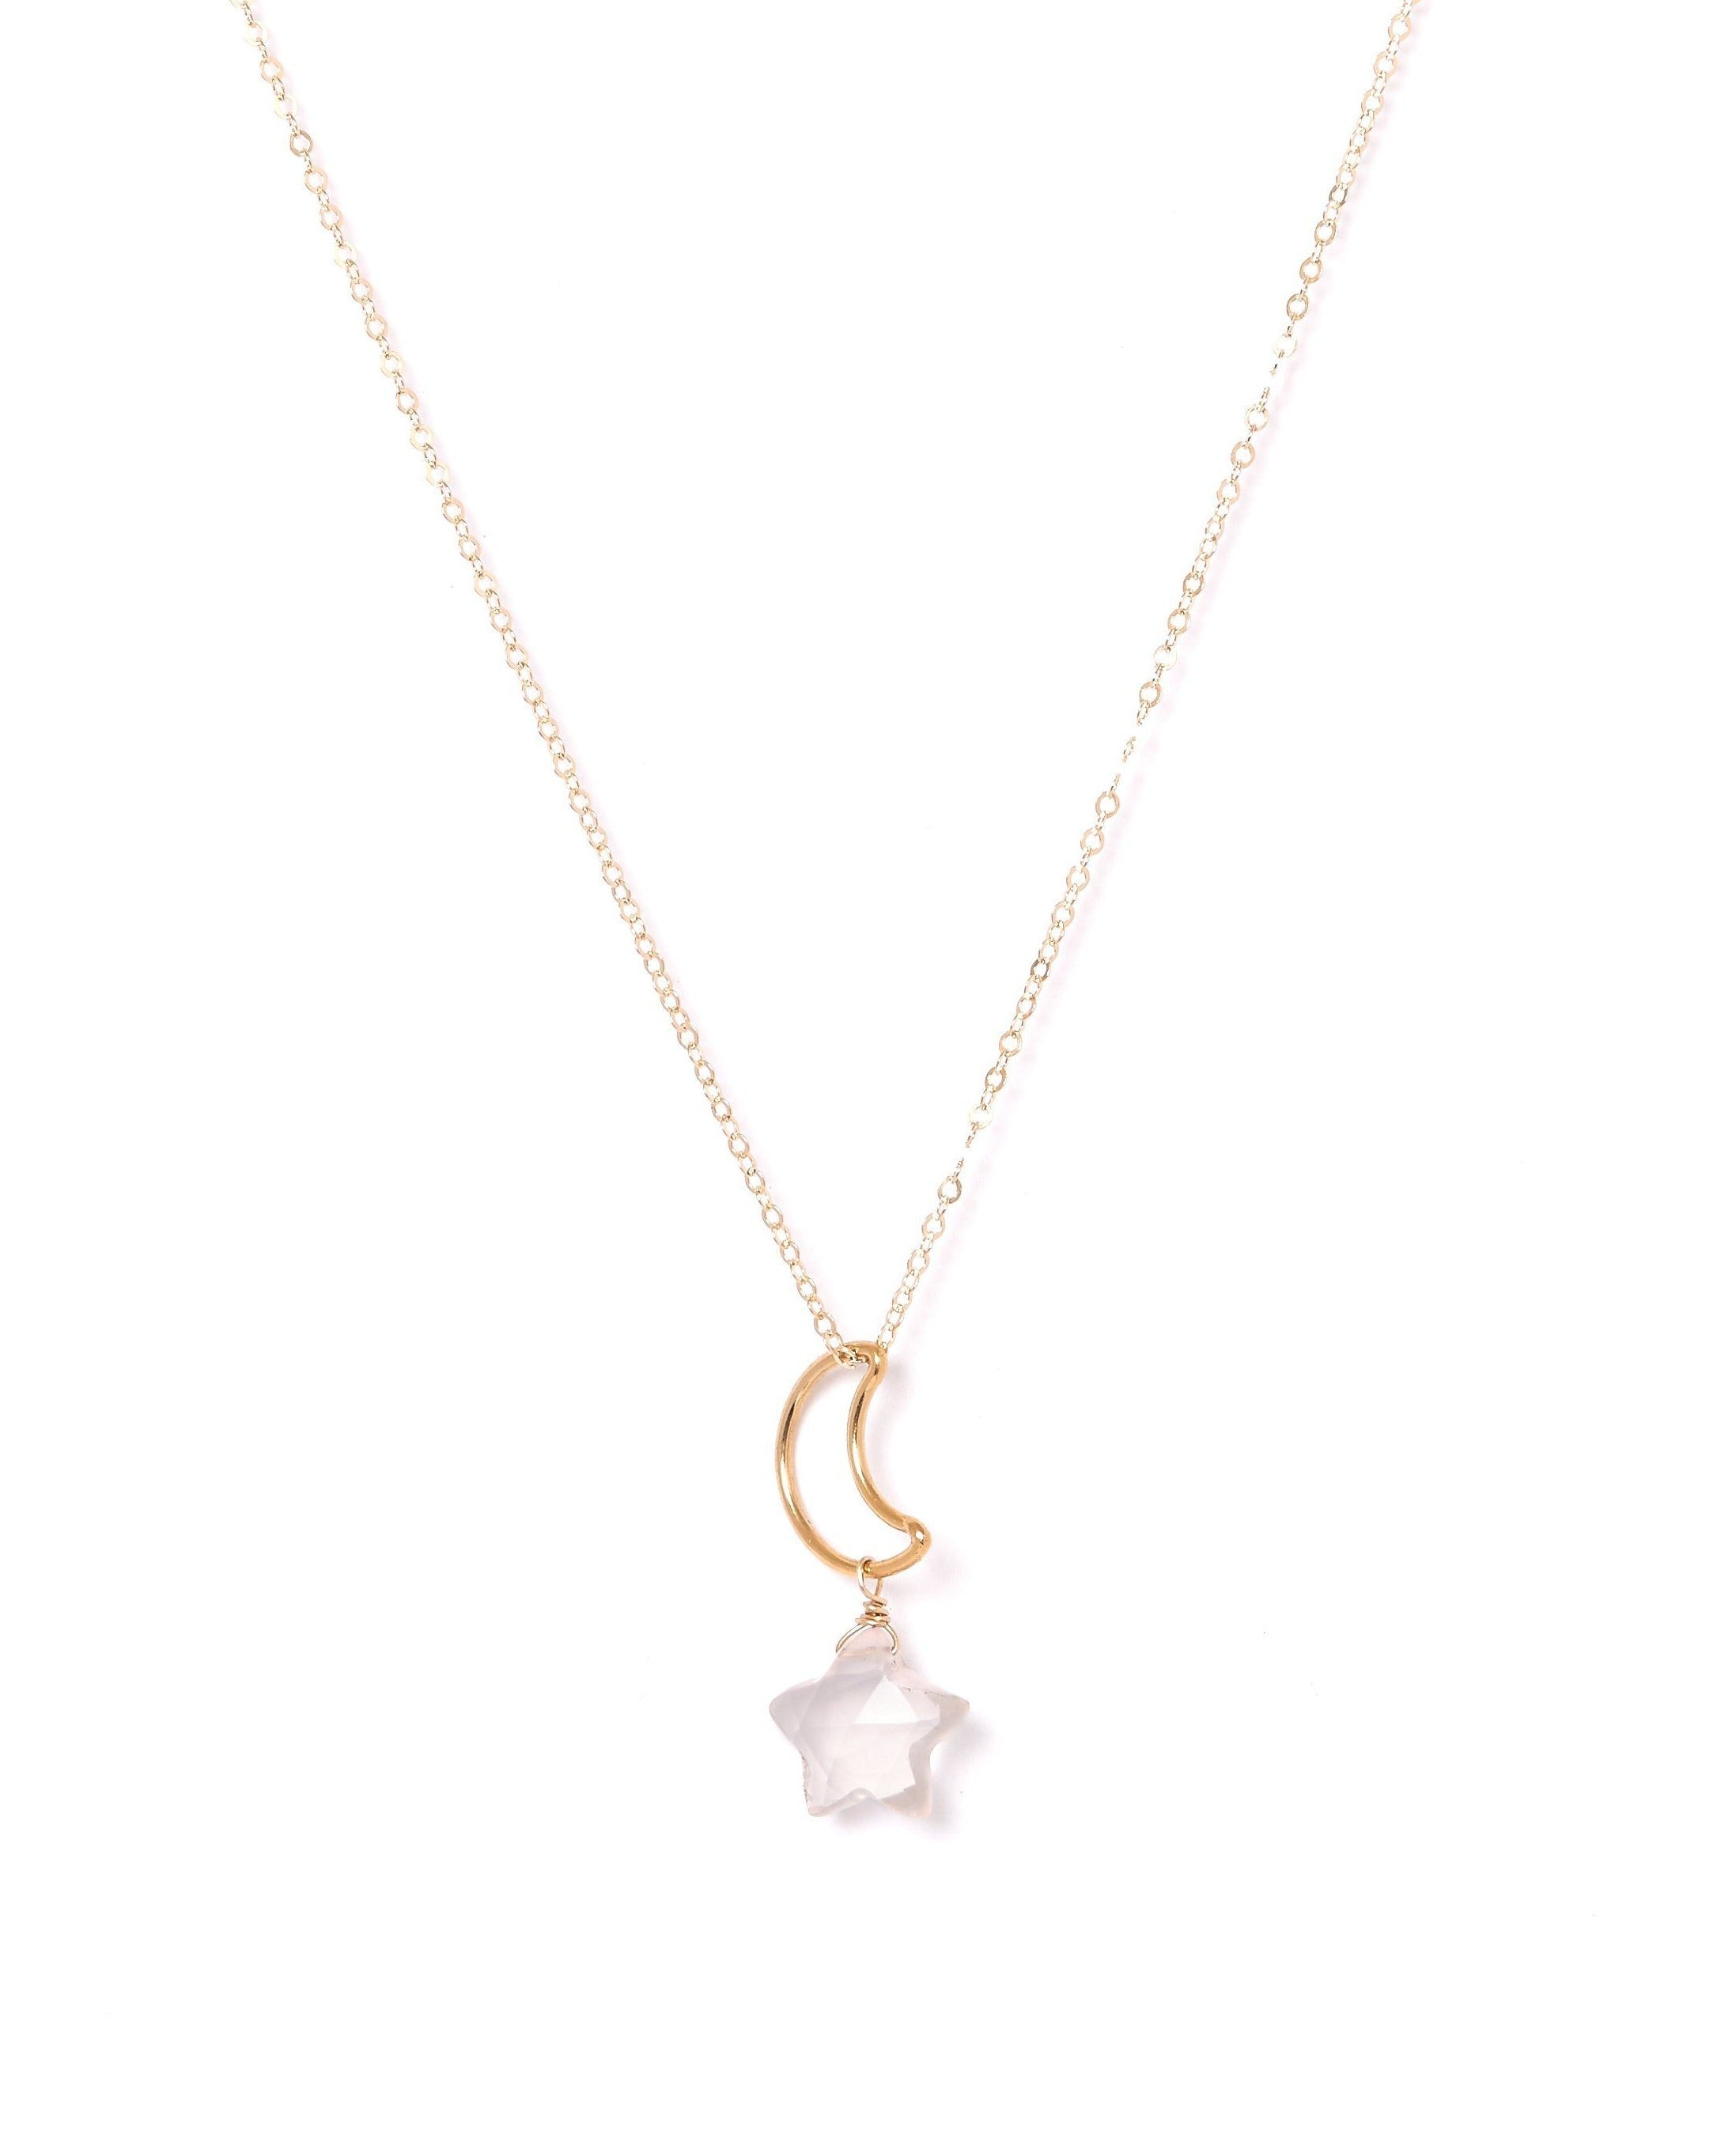 Lunastar Necklace by KOZAKH. A 16 to 18 inch adjustable length necklace, crafted in 14K Gold Filled, featuring a 13mm moon charm and a Rose Quartz star charm.